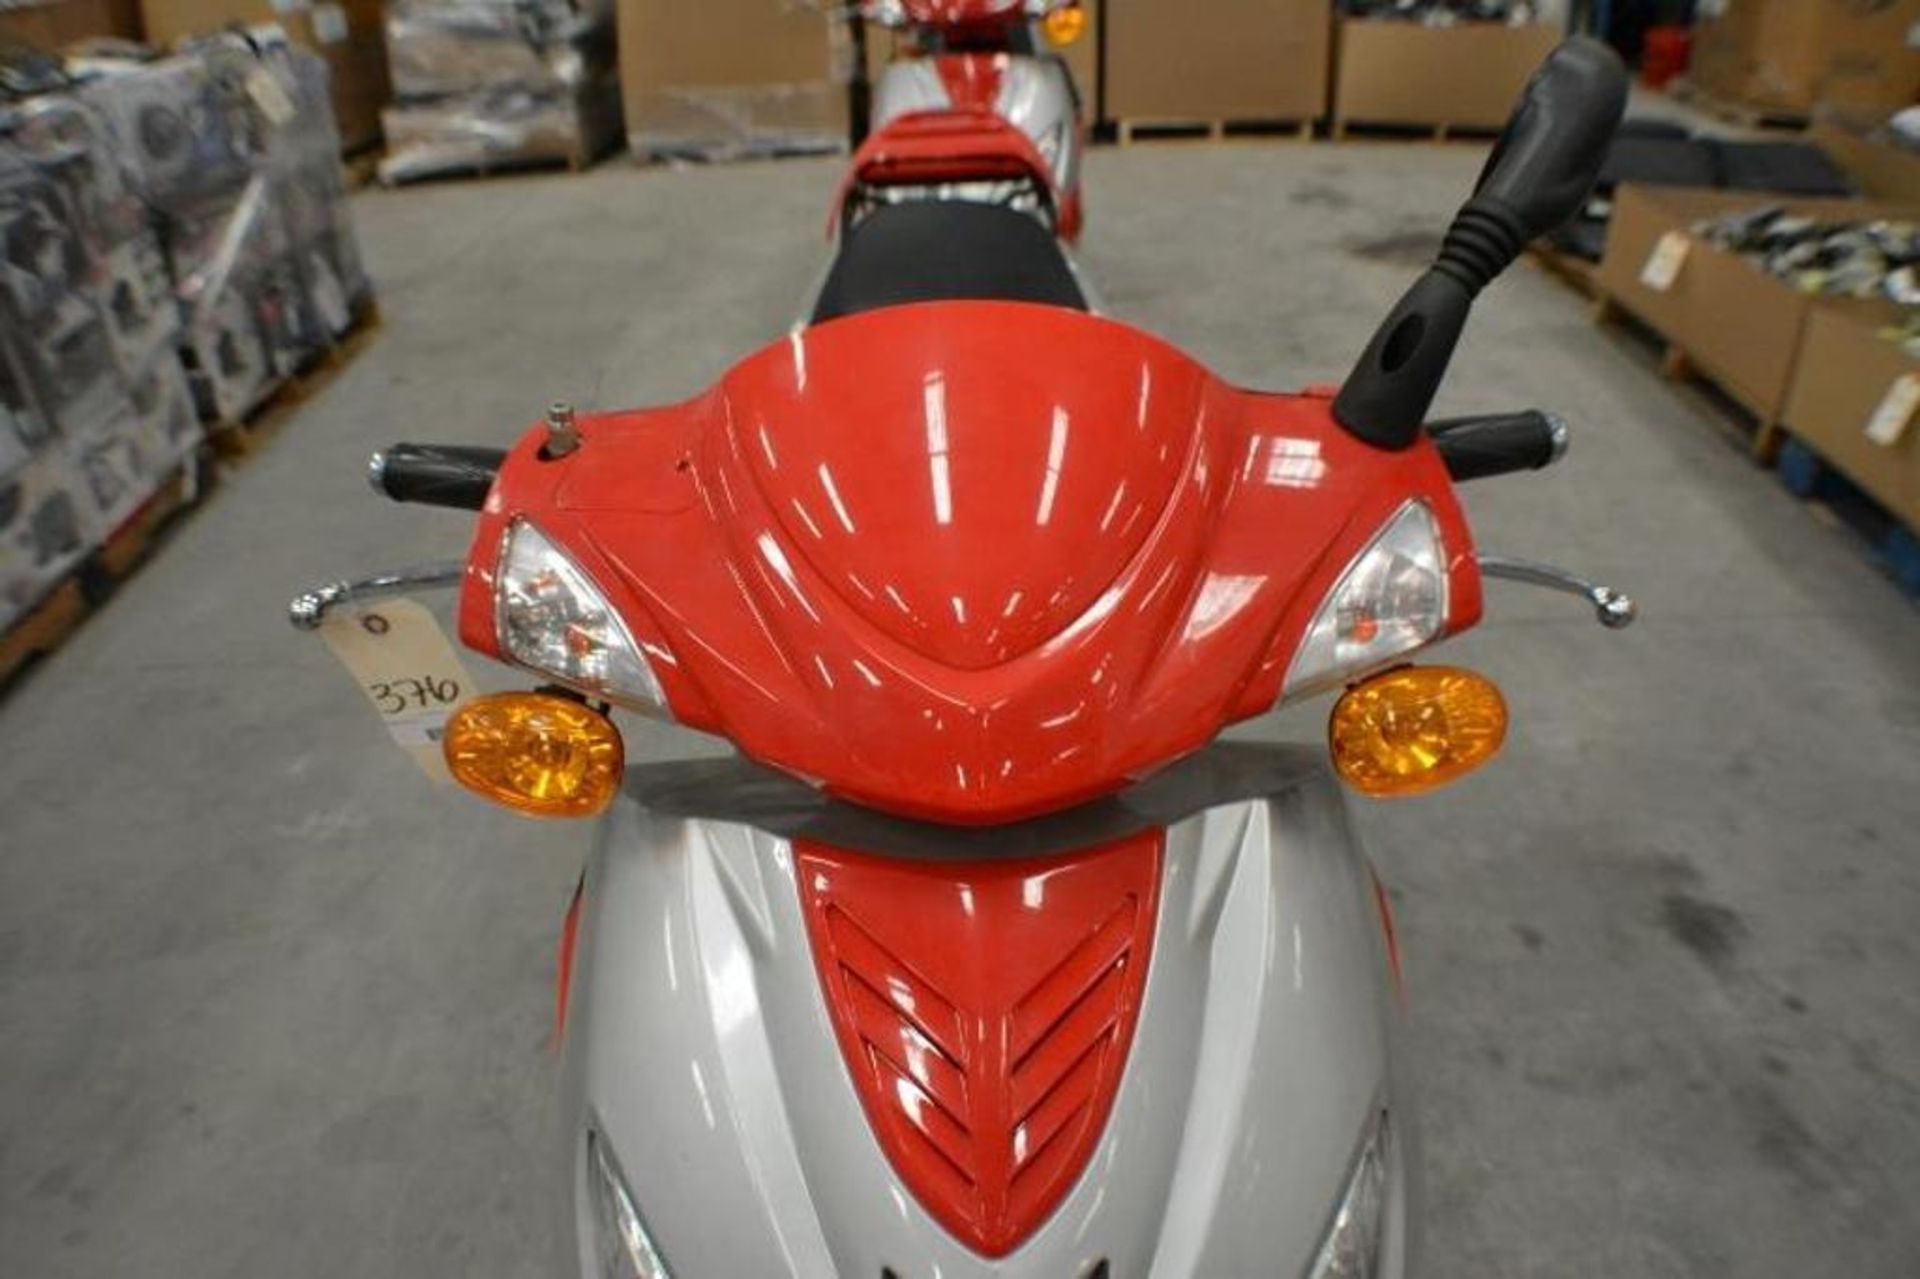 Electric Scooter 50cc Red/Black Color. This unit is for EXPORT ONLY. Buyers acknowledges is for expo - Image 3 of 8